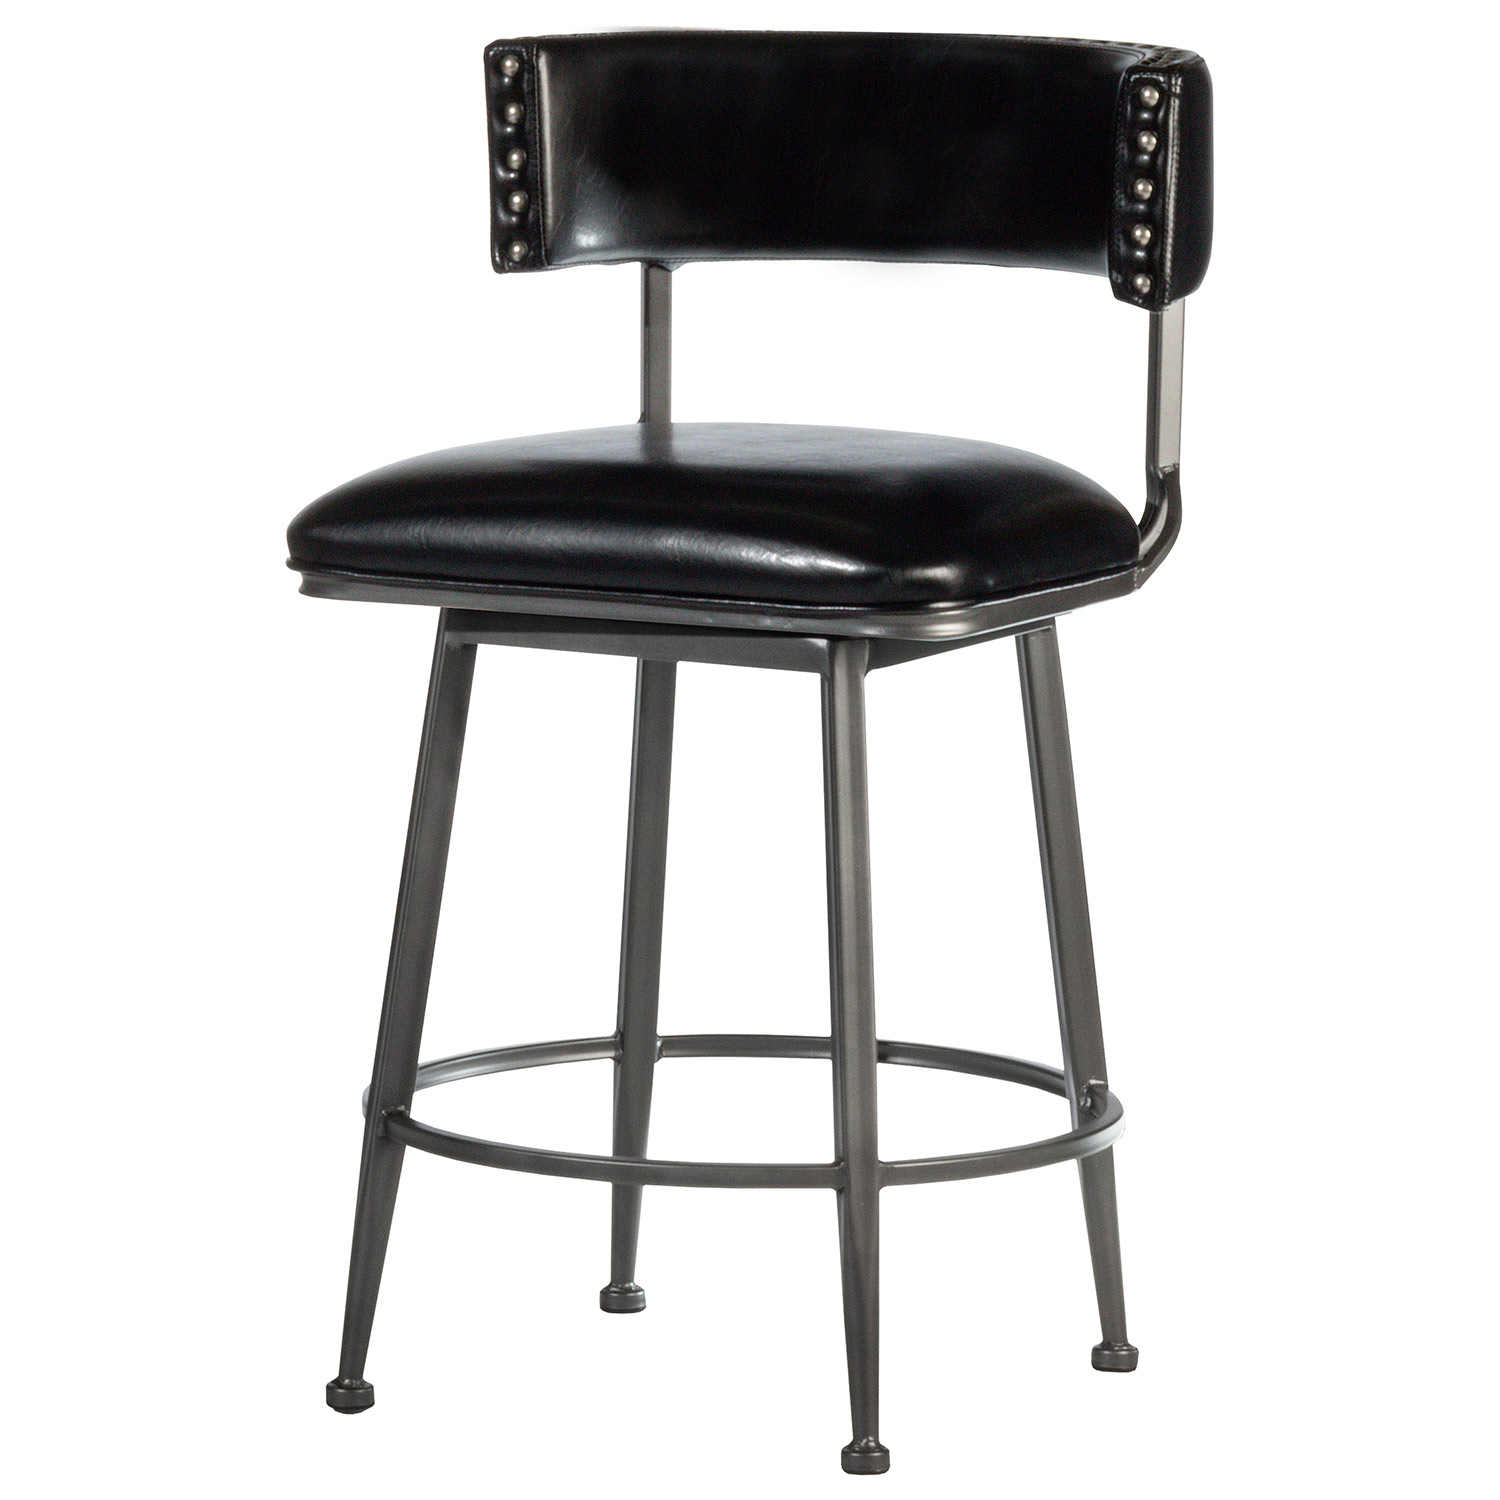 Hillsdale Kinsella Commercial Grade Swivel Counter Stool - Charcoal